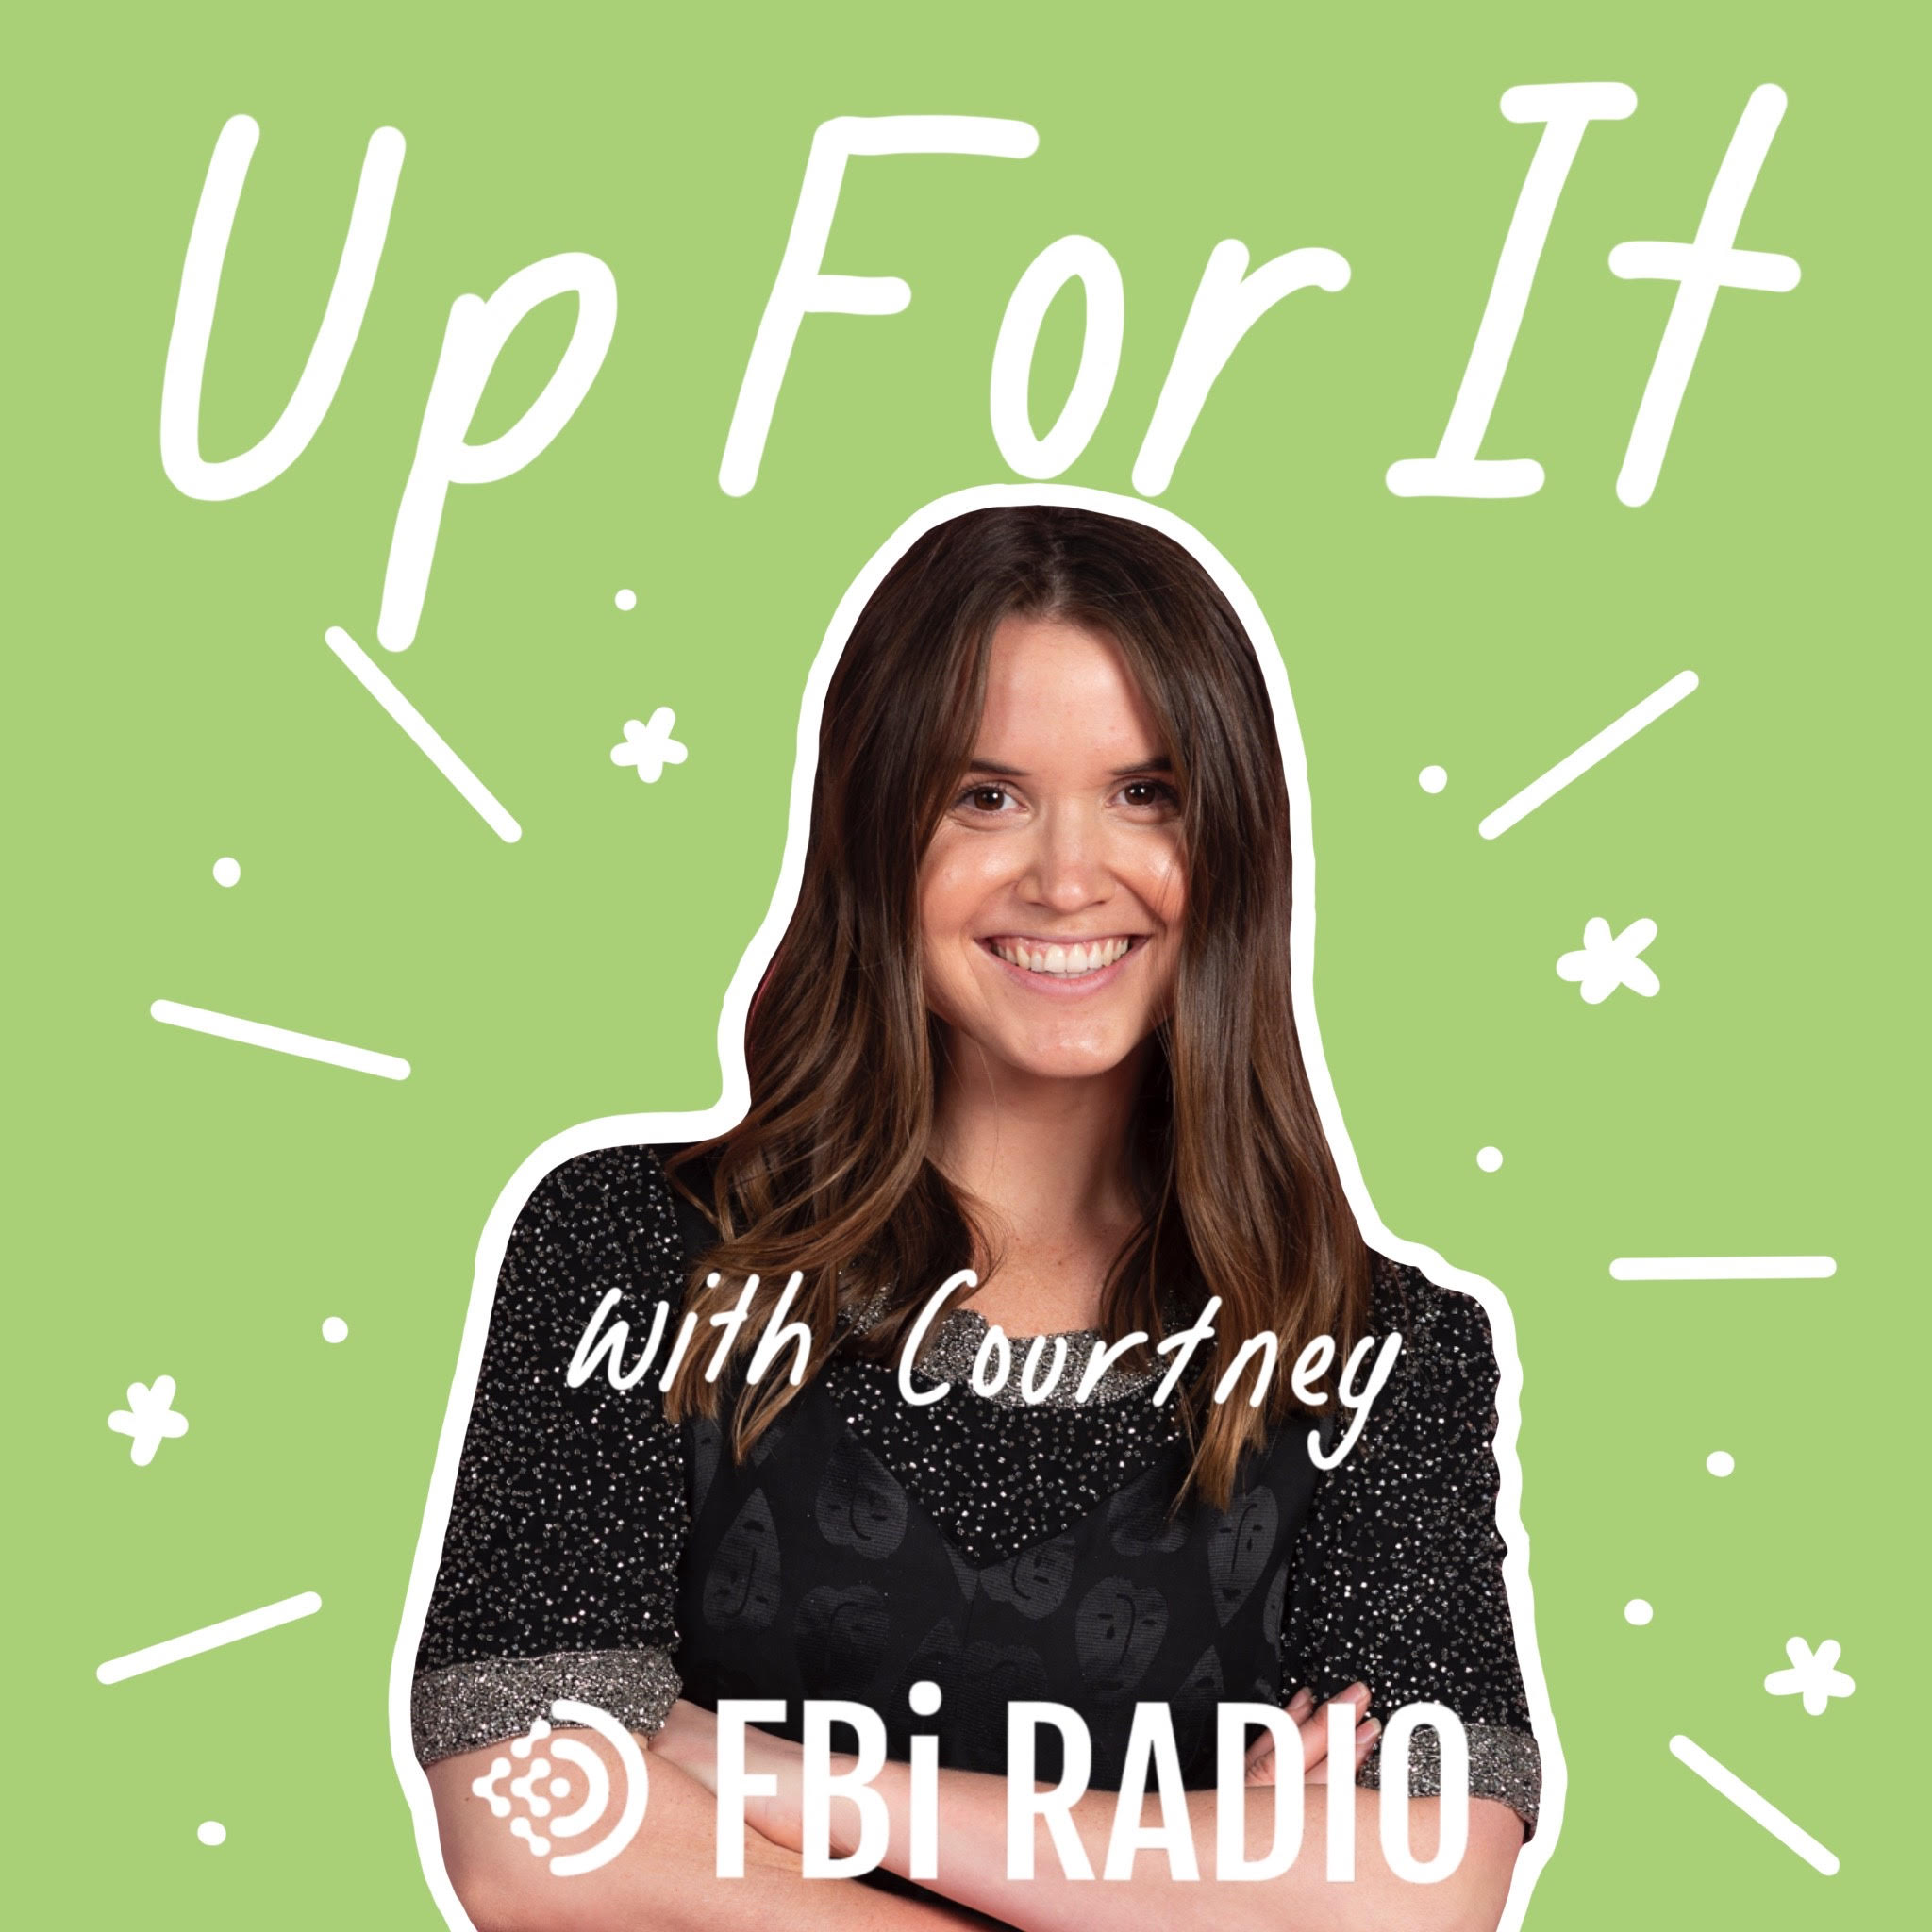 Episode 16 - Up For It on FBi: Jannah Beth Guest Interview